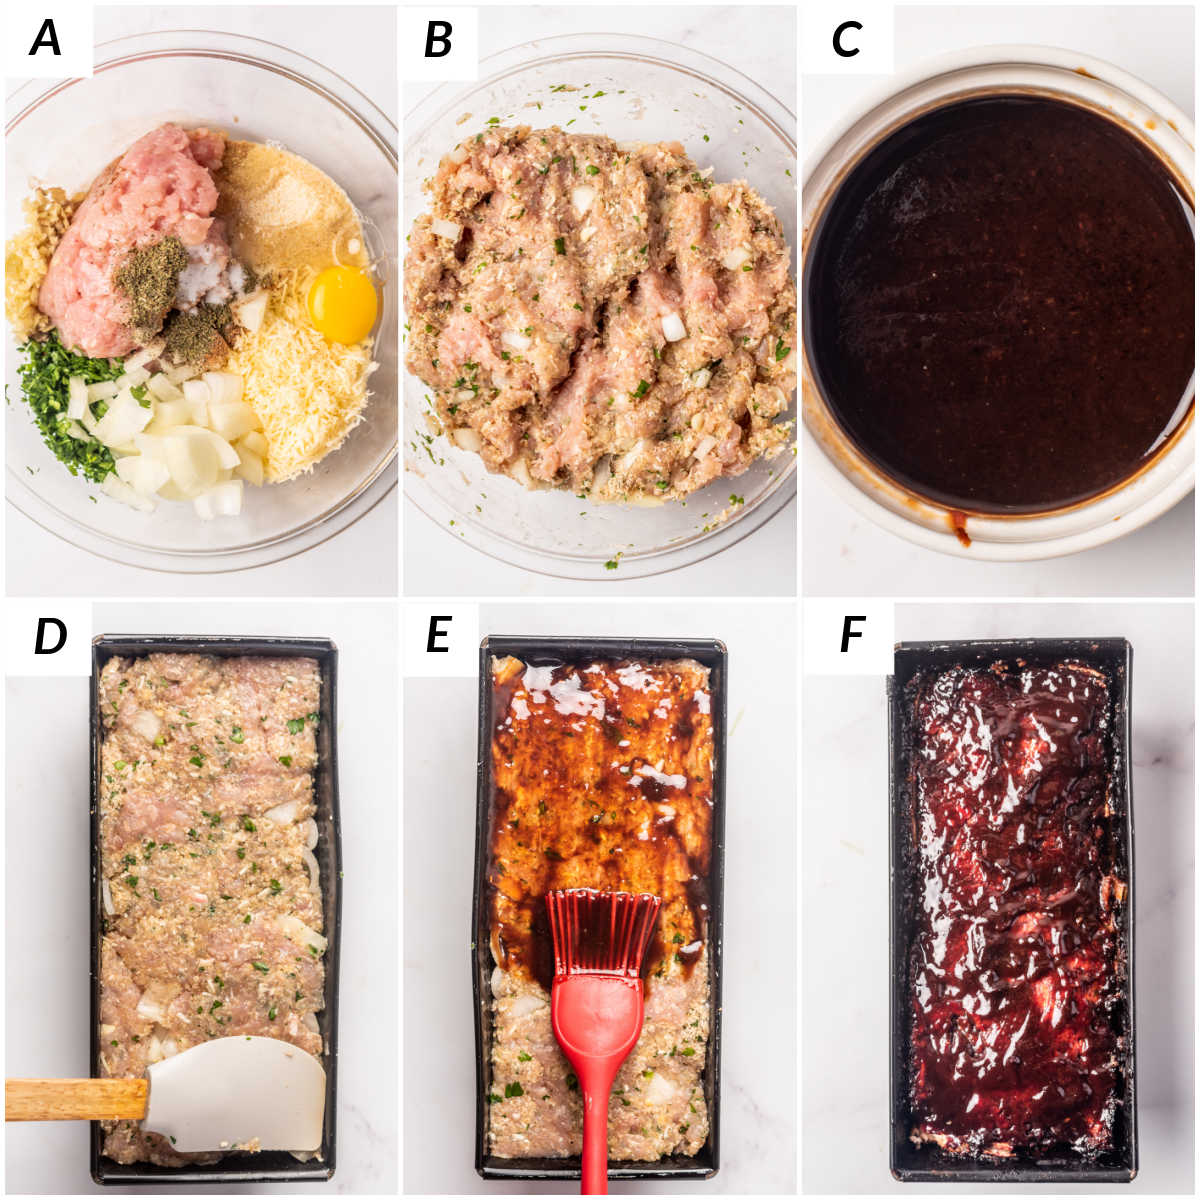 image collage showing the steps for making chicken meatloaf